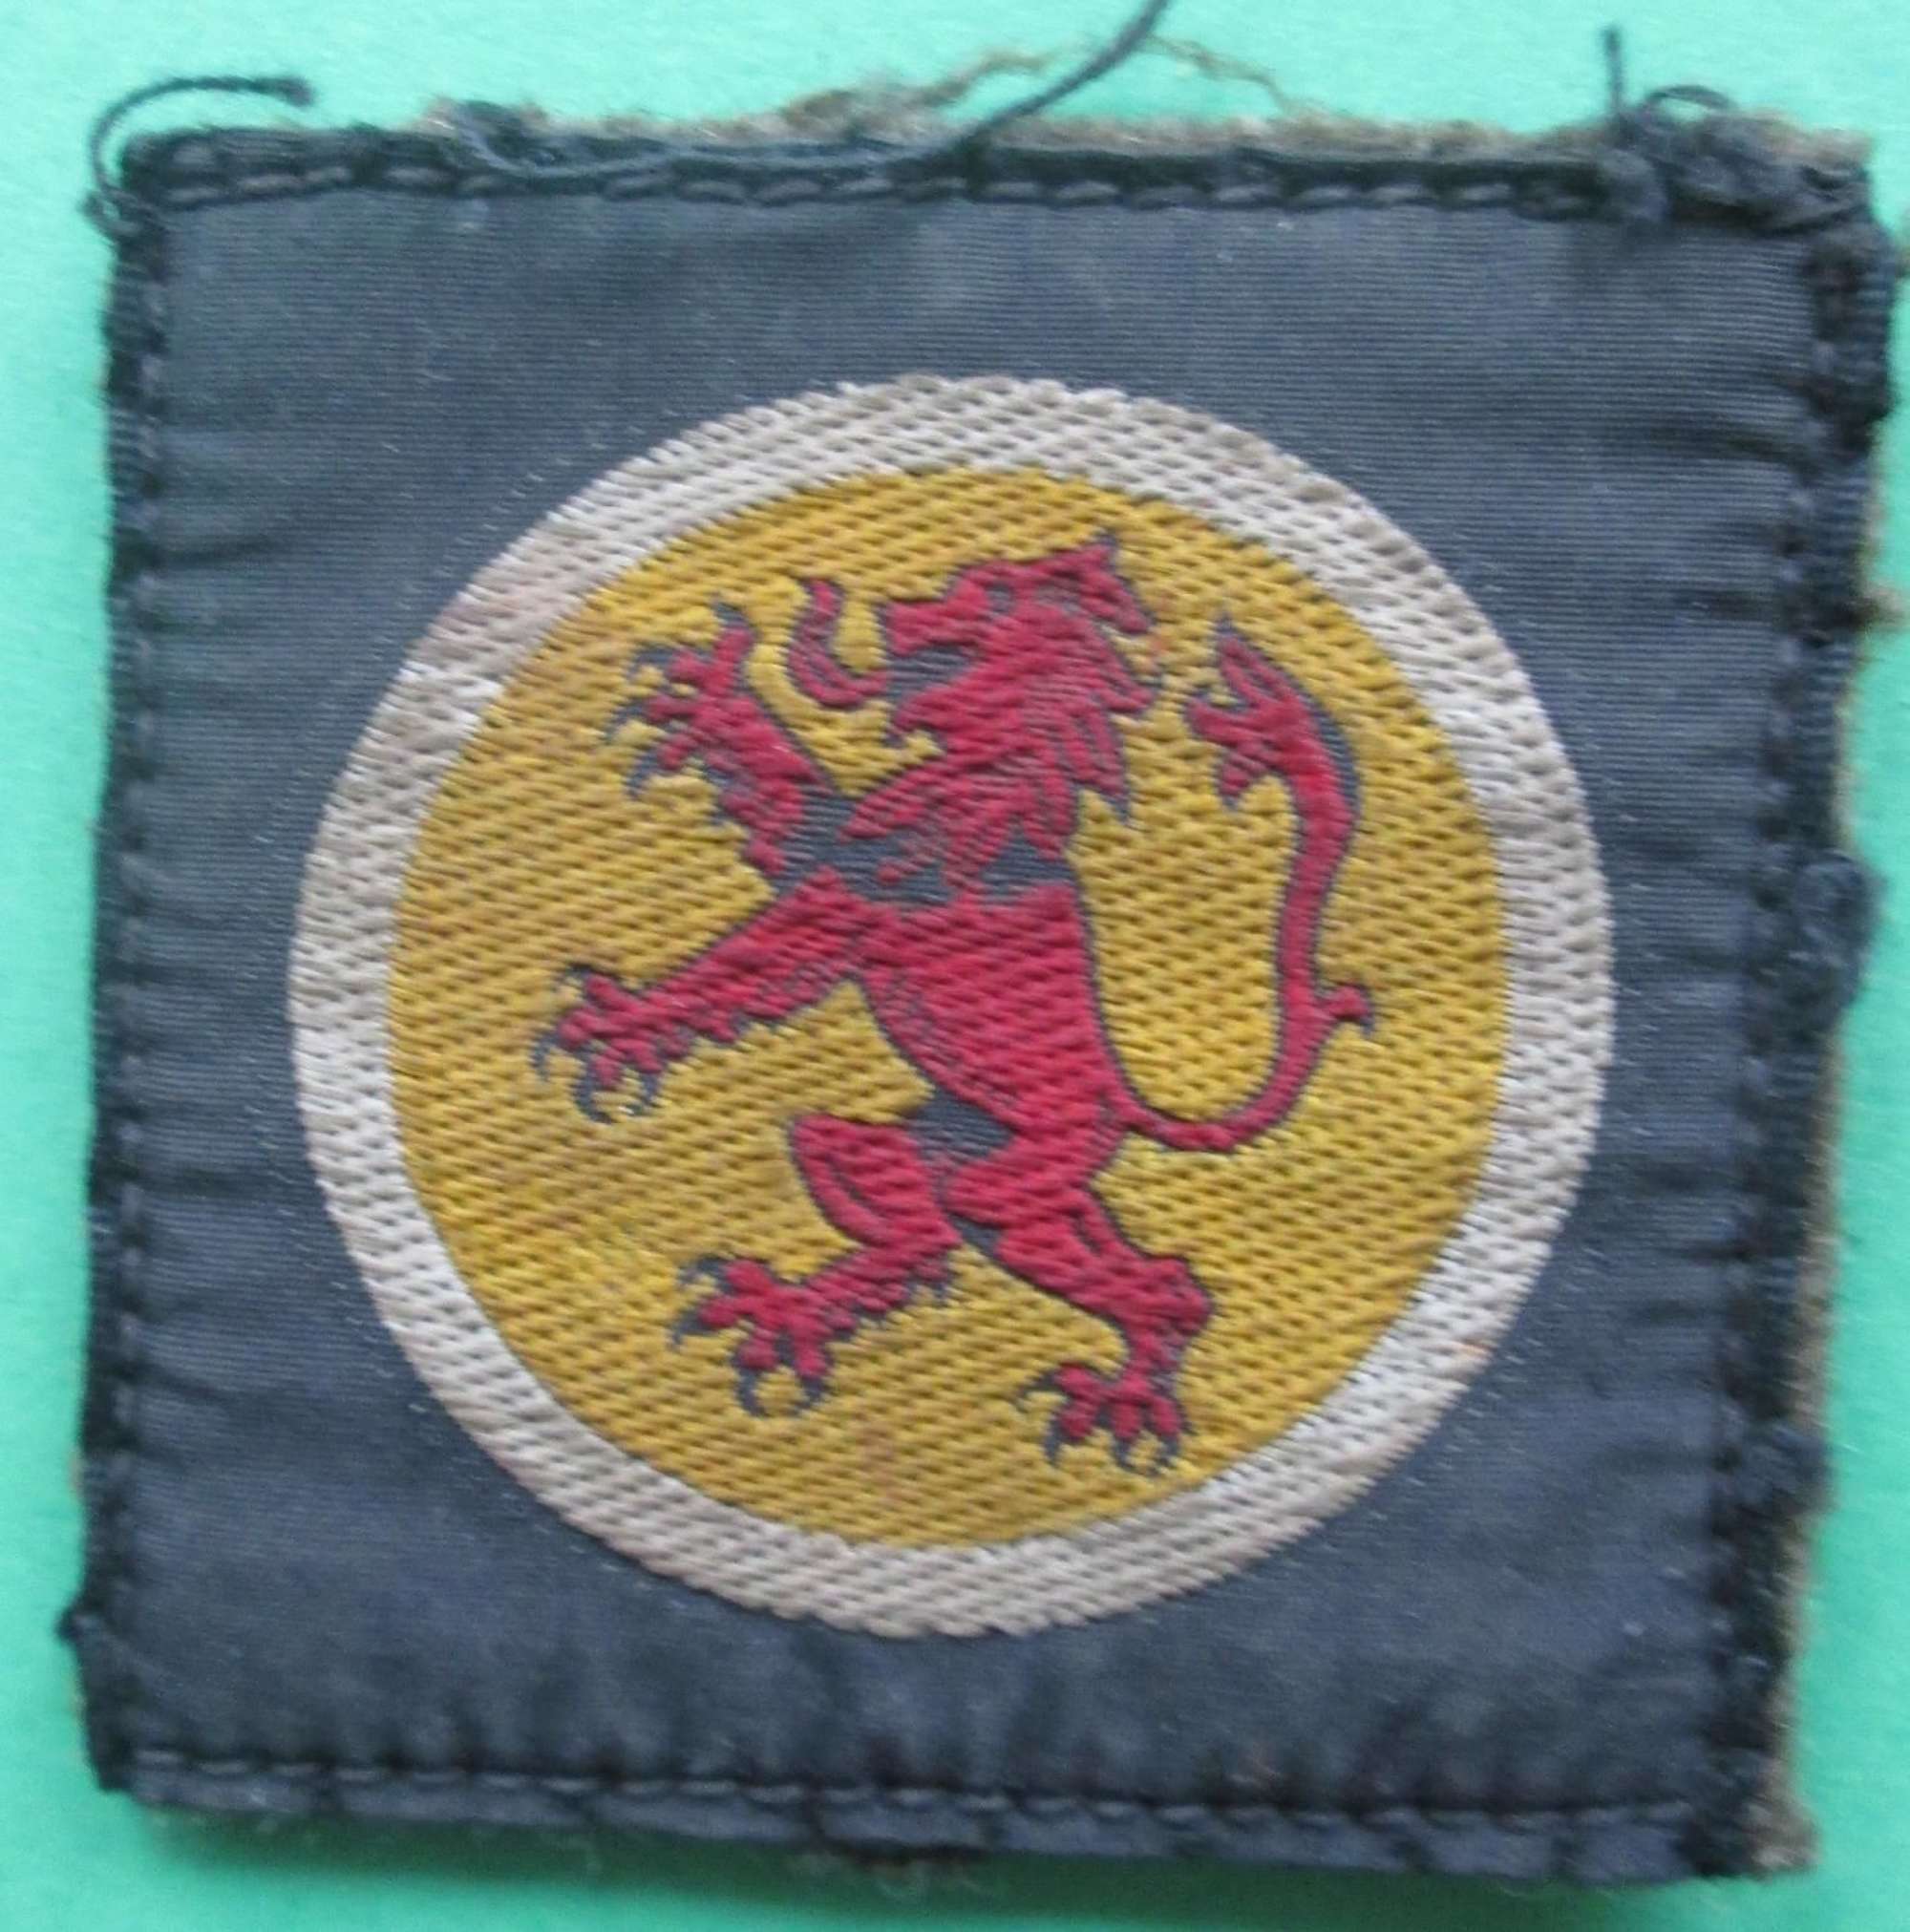 A GOOD USED 15TH SCOTTISH DIVISION FORMATION PATCH